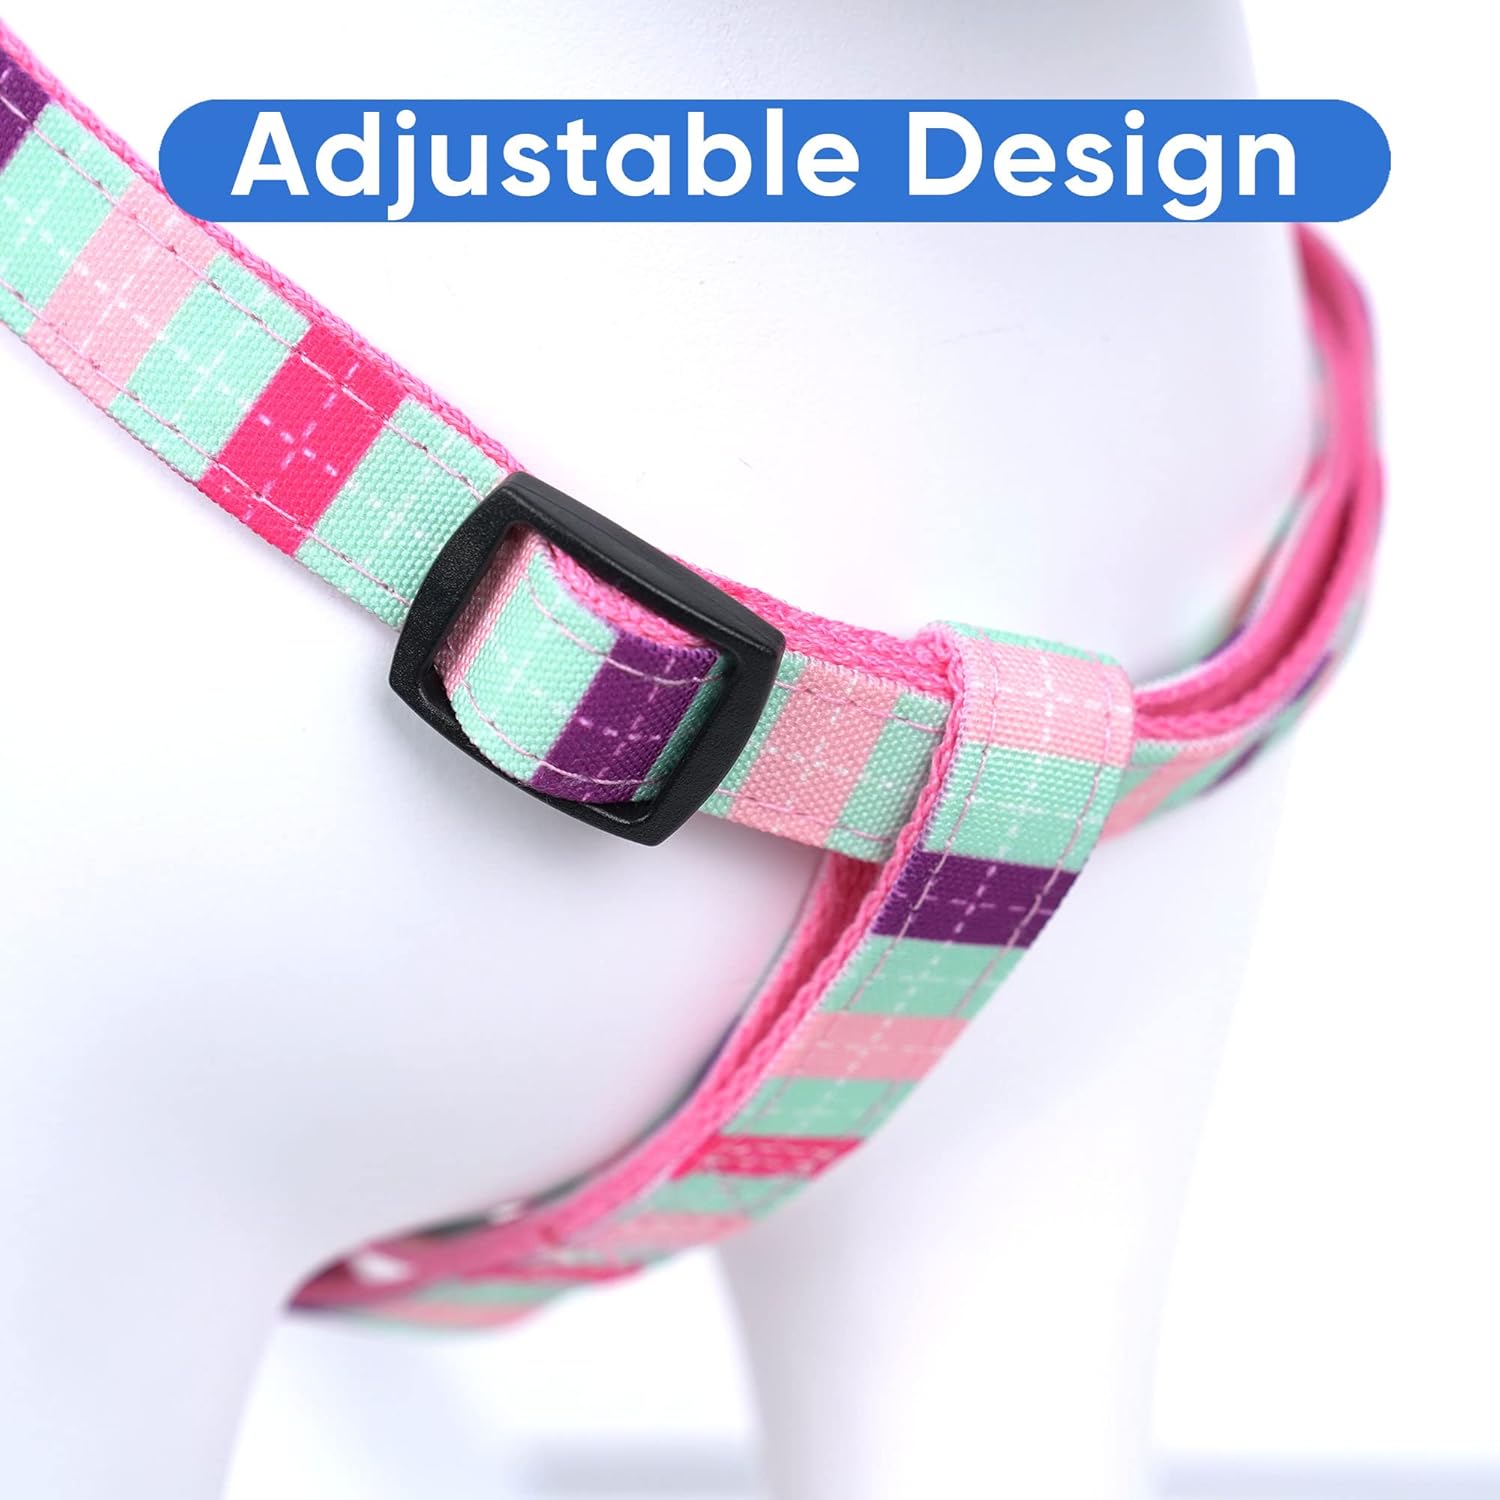 Pawtitas Extra Small Dog Harness Adjustable Dog Harness No Pull Harness For Dogs Multicolor XS Harness Teal/Pink/Purple :Pet Supplies